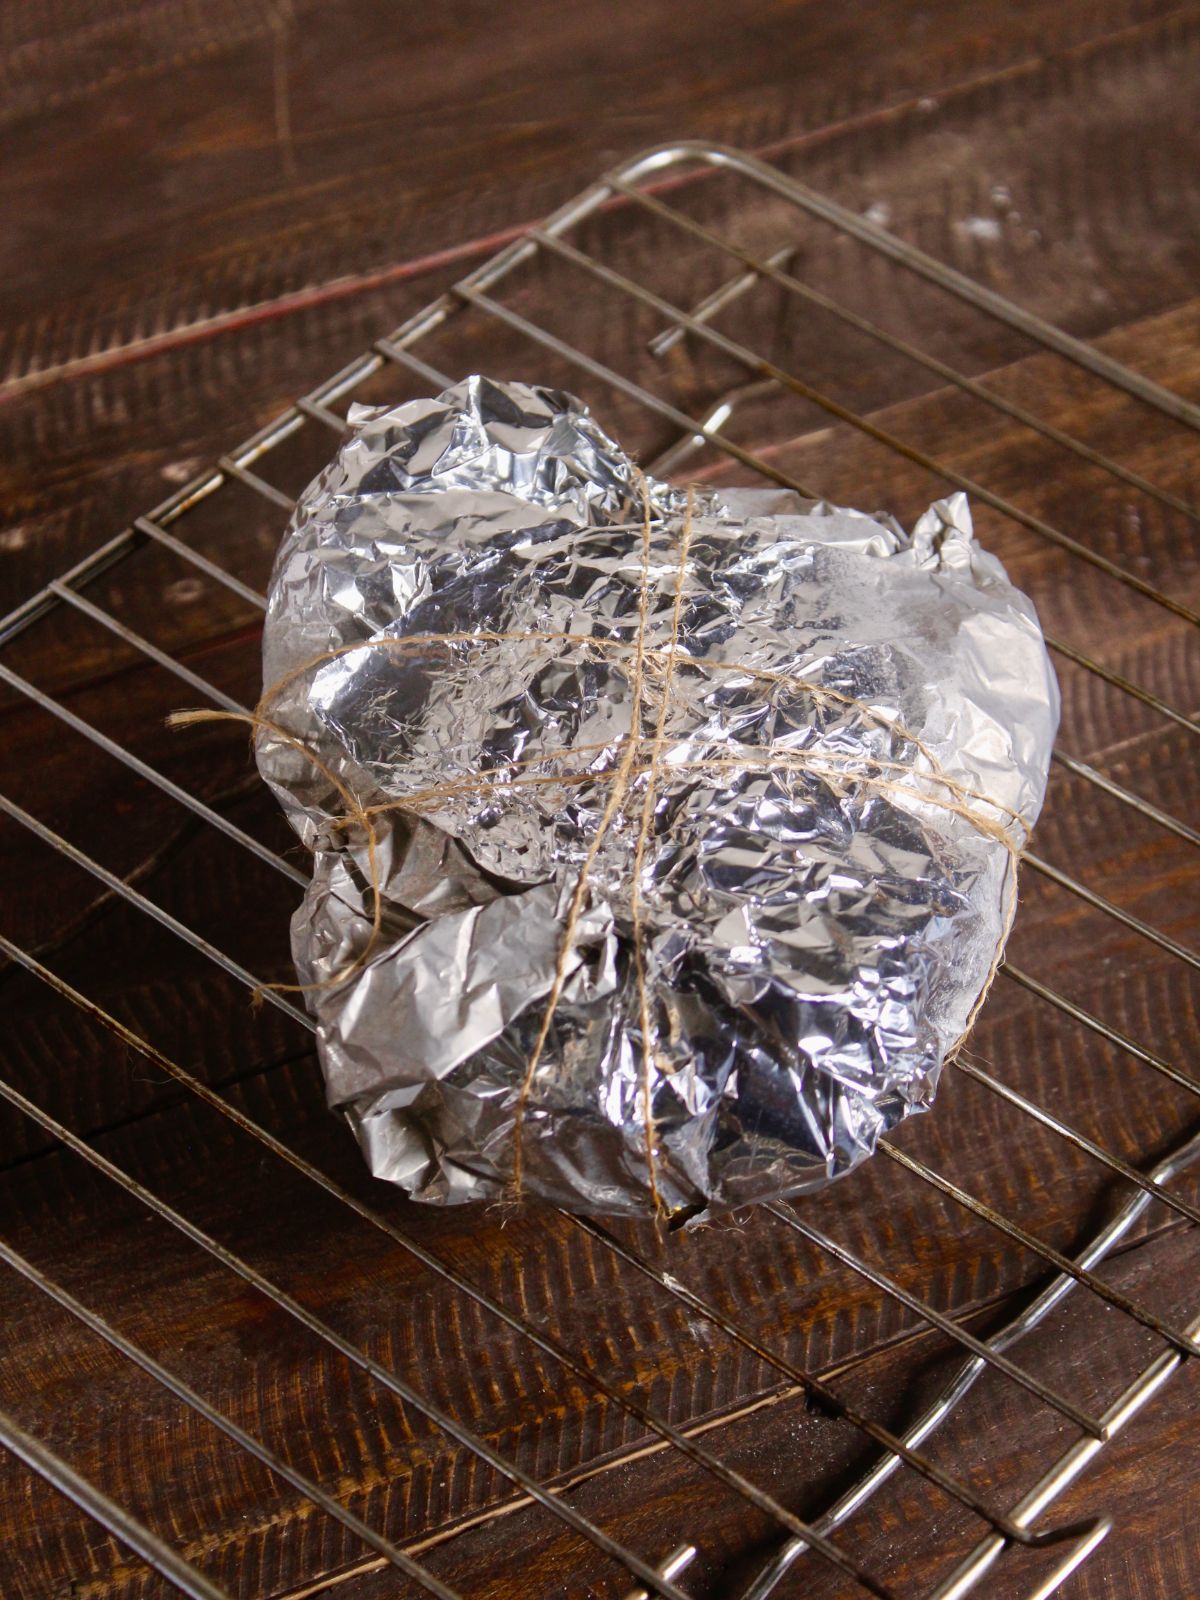 cover the foil on top and seal it with a thread